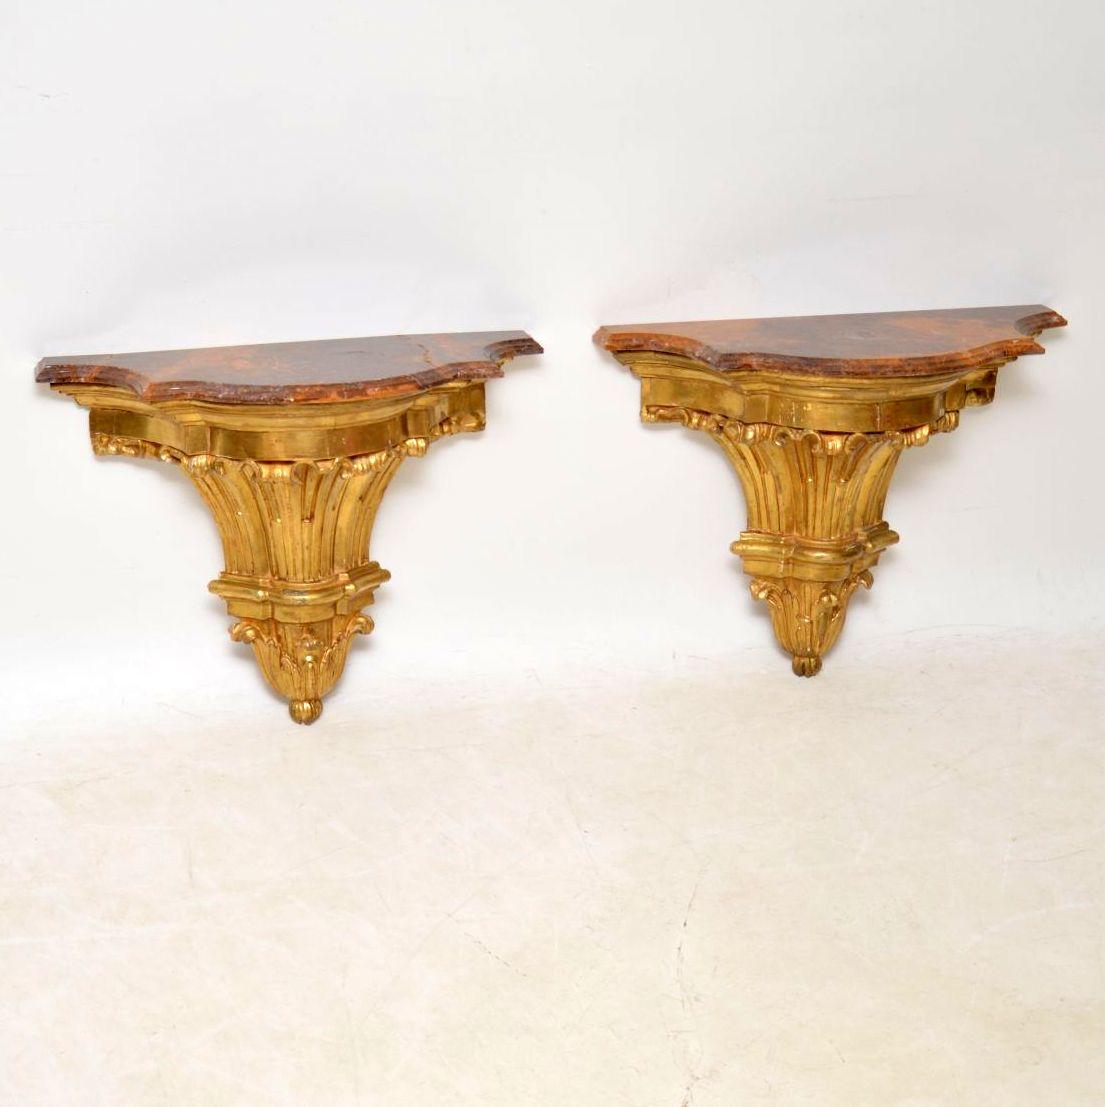 Pair of French antique giltwood wall mounting side tables with marble tops. I would date them to circa 1850s period and would say the marble tops are more recent. The gilt work is all original and there is a bit of natural ageing in places, so